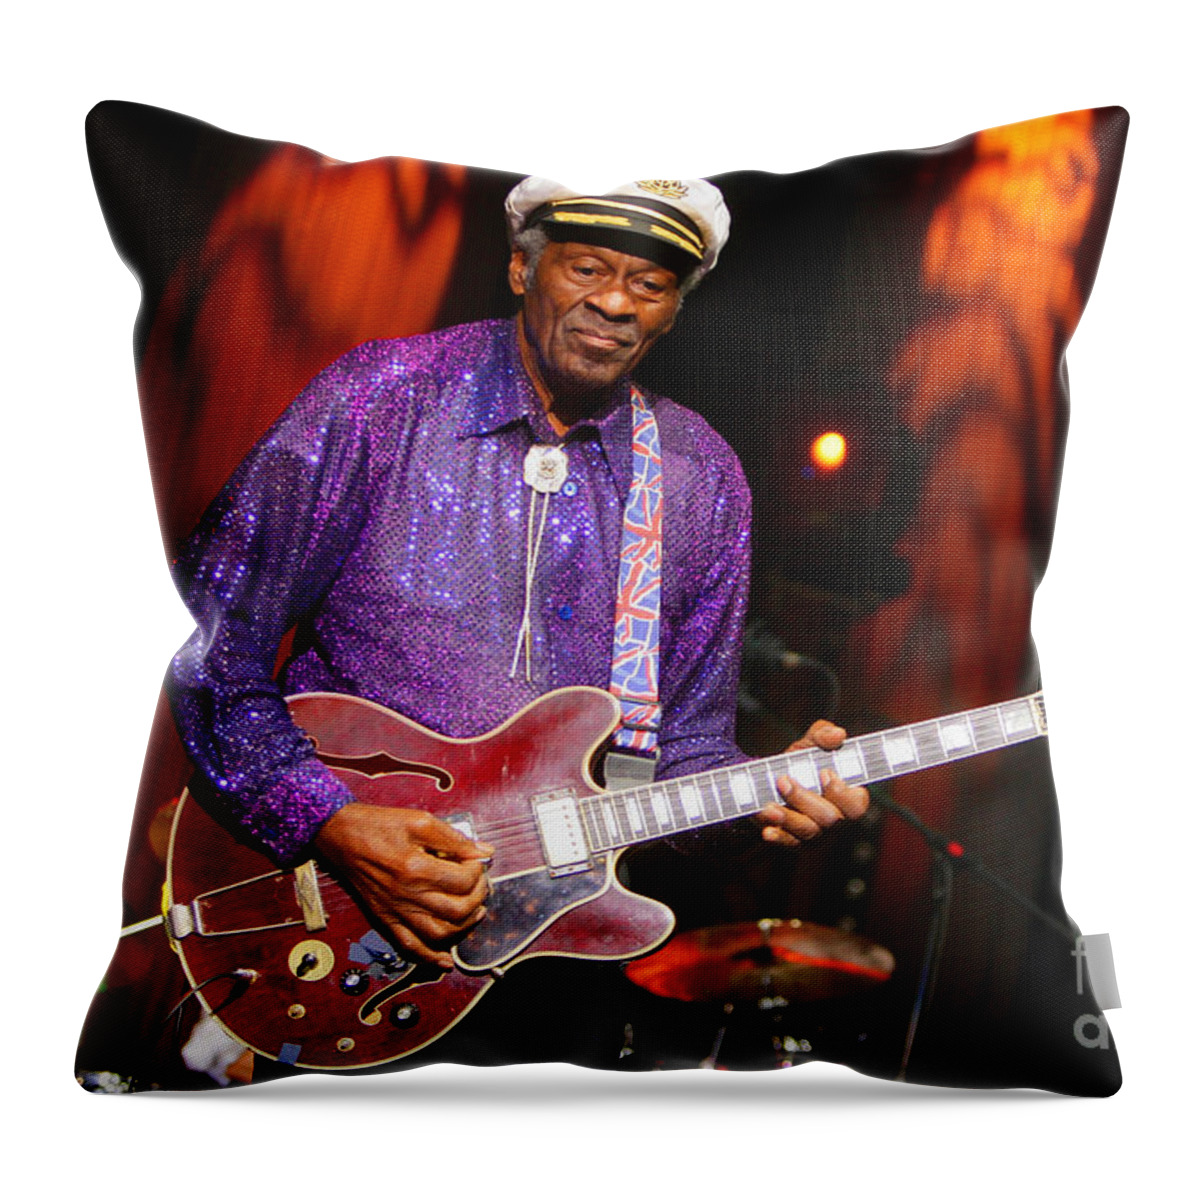 Chuck Throw Pillow featuring the photograph Chuck Barry by Action